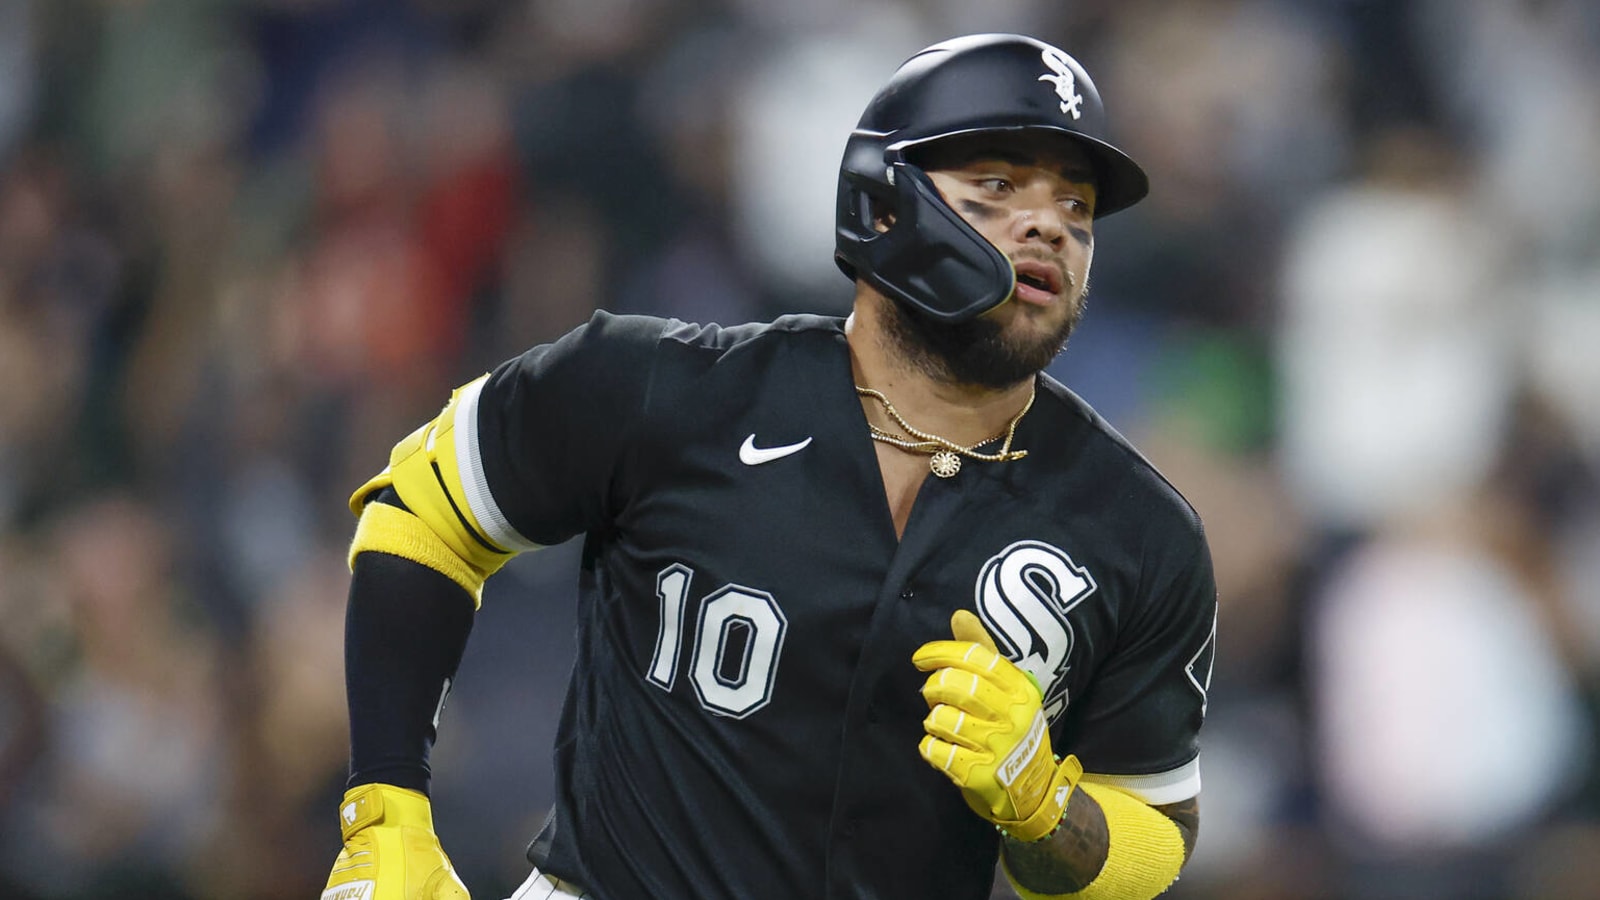 Countdown to White Sox Spring Training: Stadium Rumors, Moncada&#39;s Determination, Prospects, and More